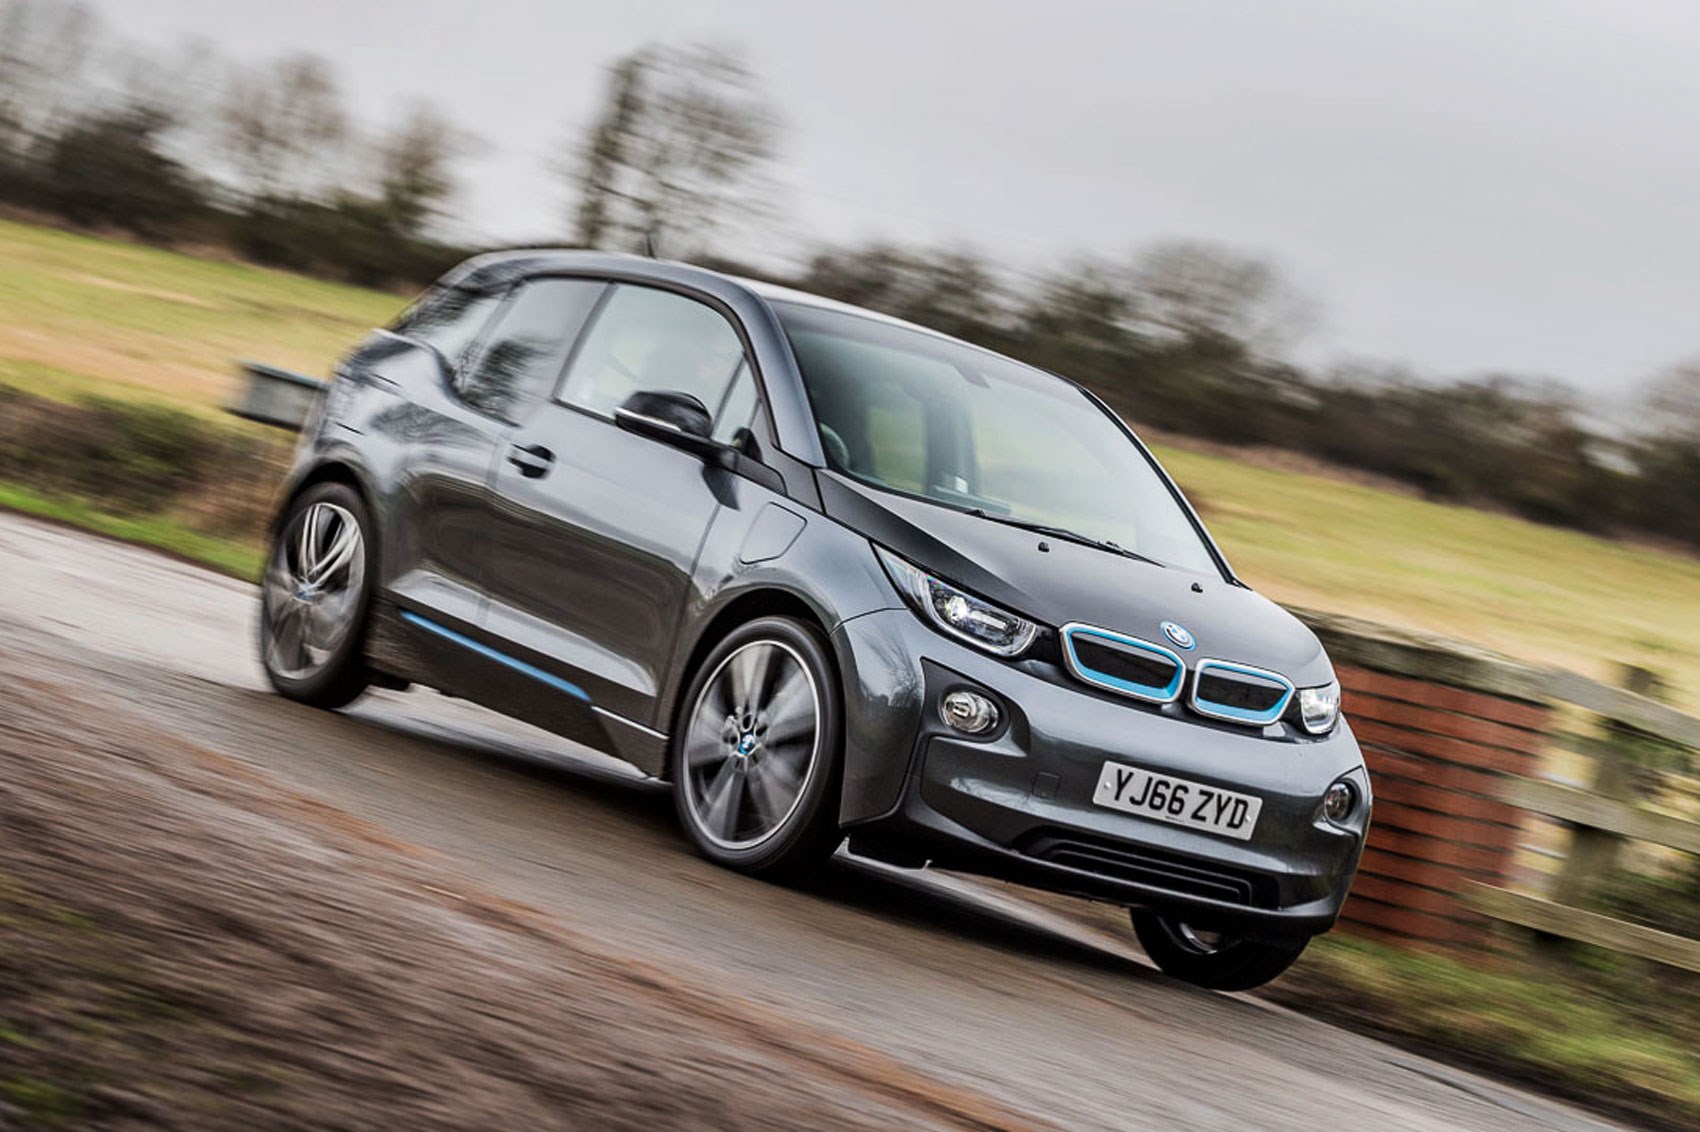 The future is now: After nine years, it's time to say goodbye to the BMW i3